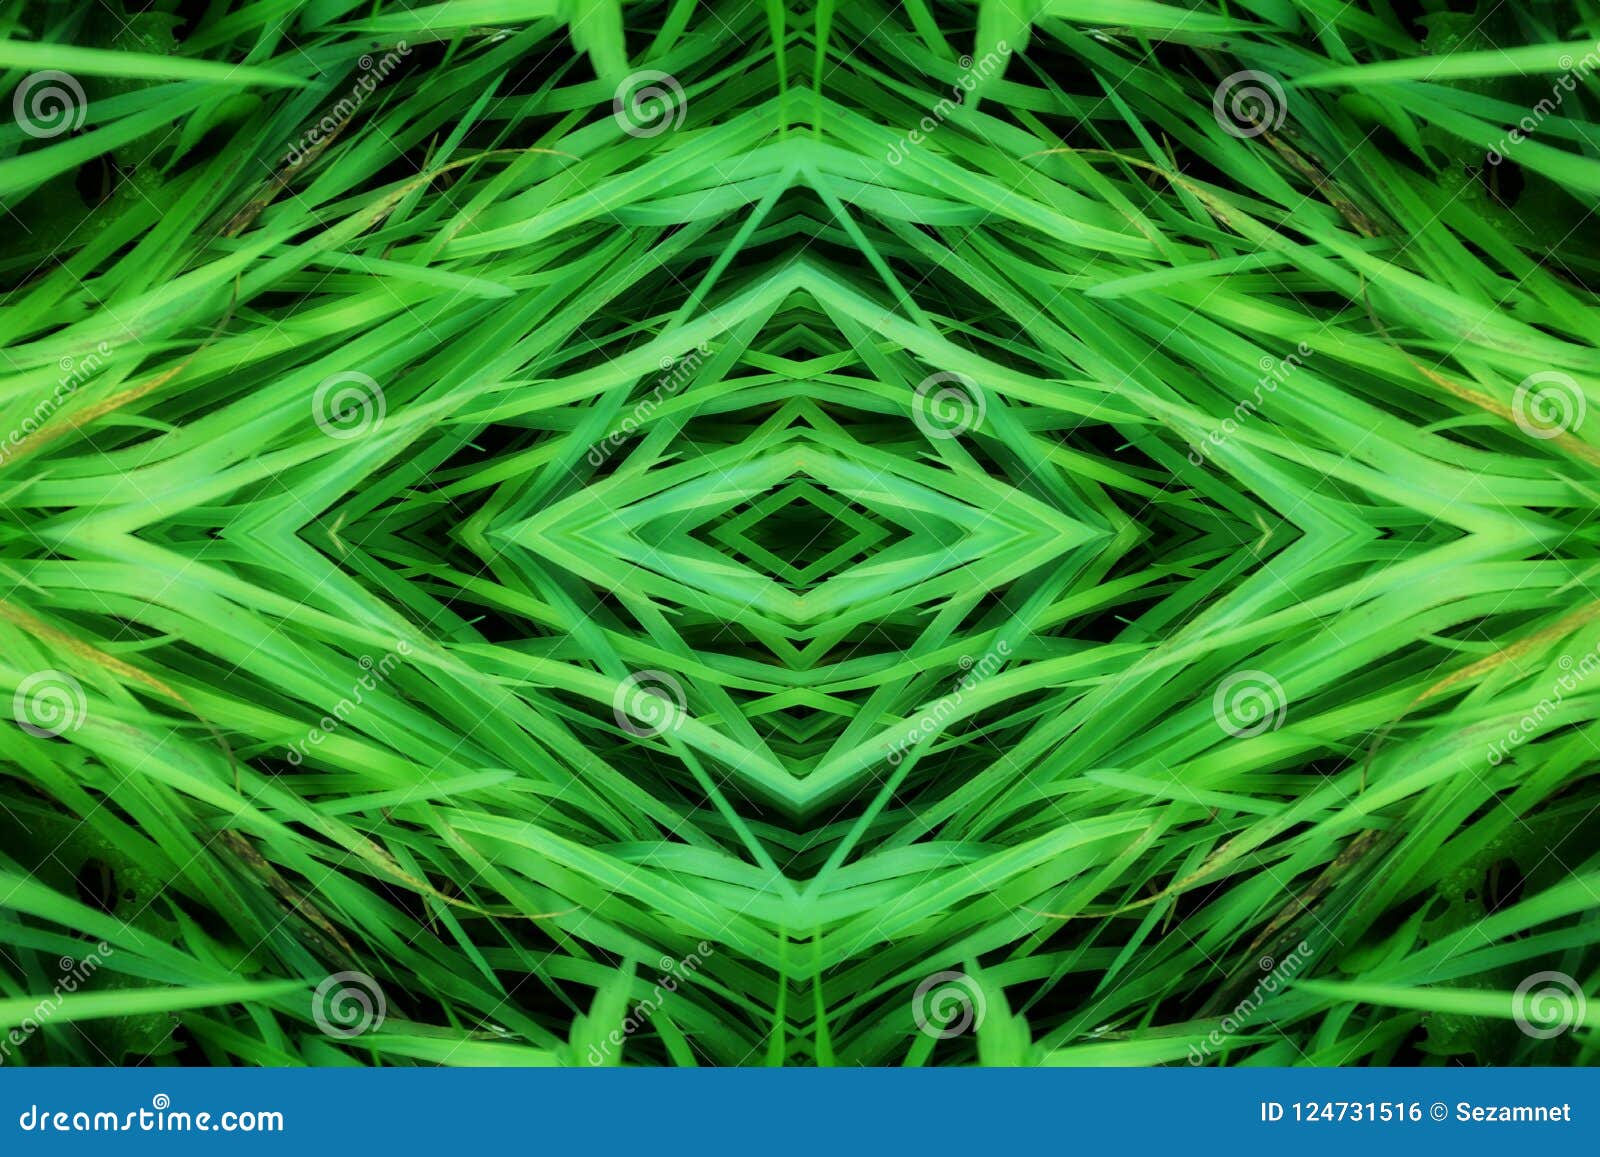 grass geometry  reflection s  logo. ecology, health, green energy concept.